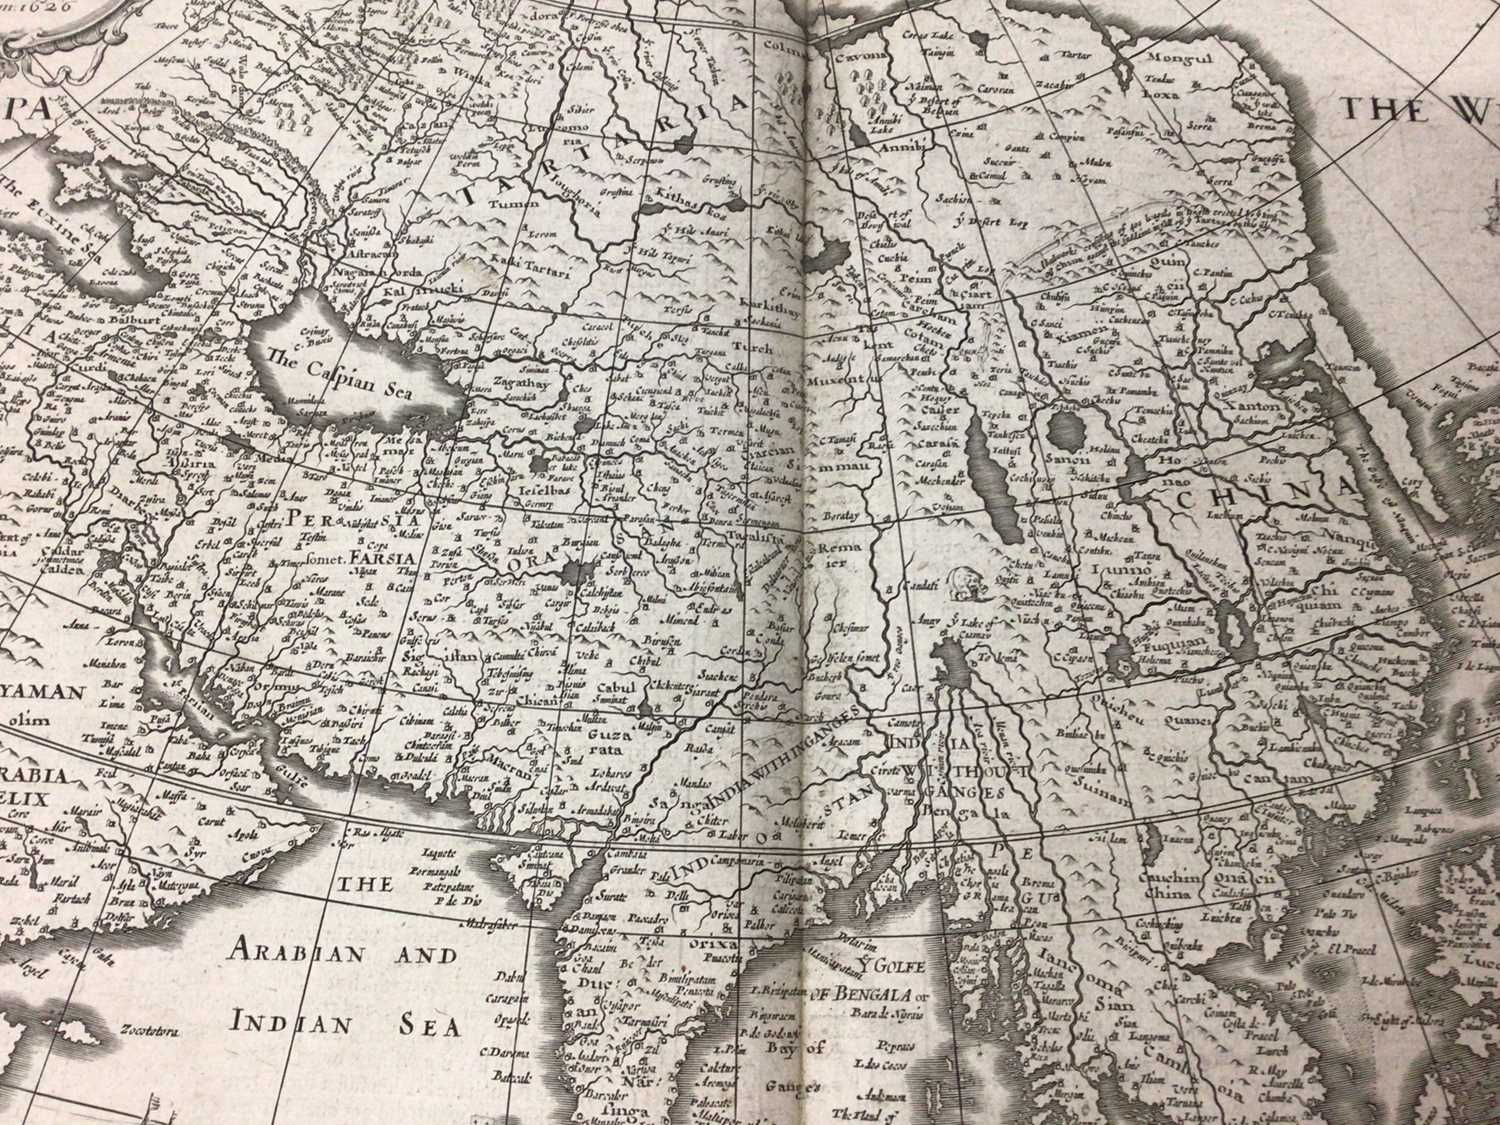 John Speed - 17th century engraved map of Asia - Image 4 of 8